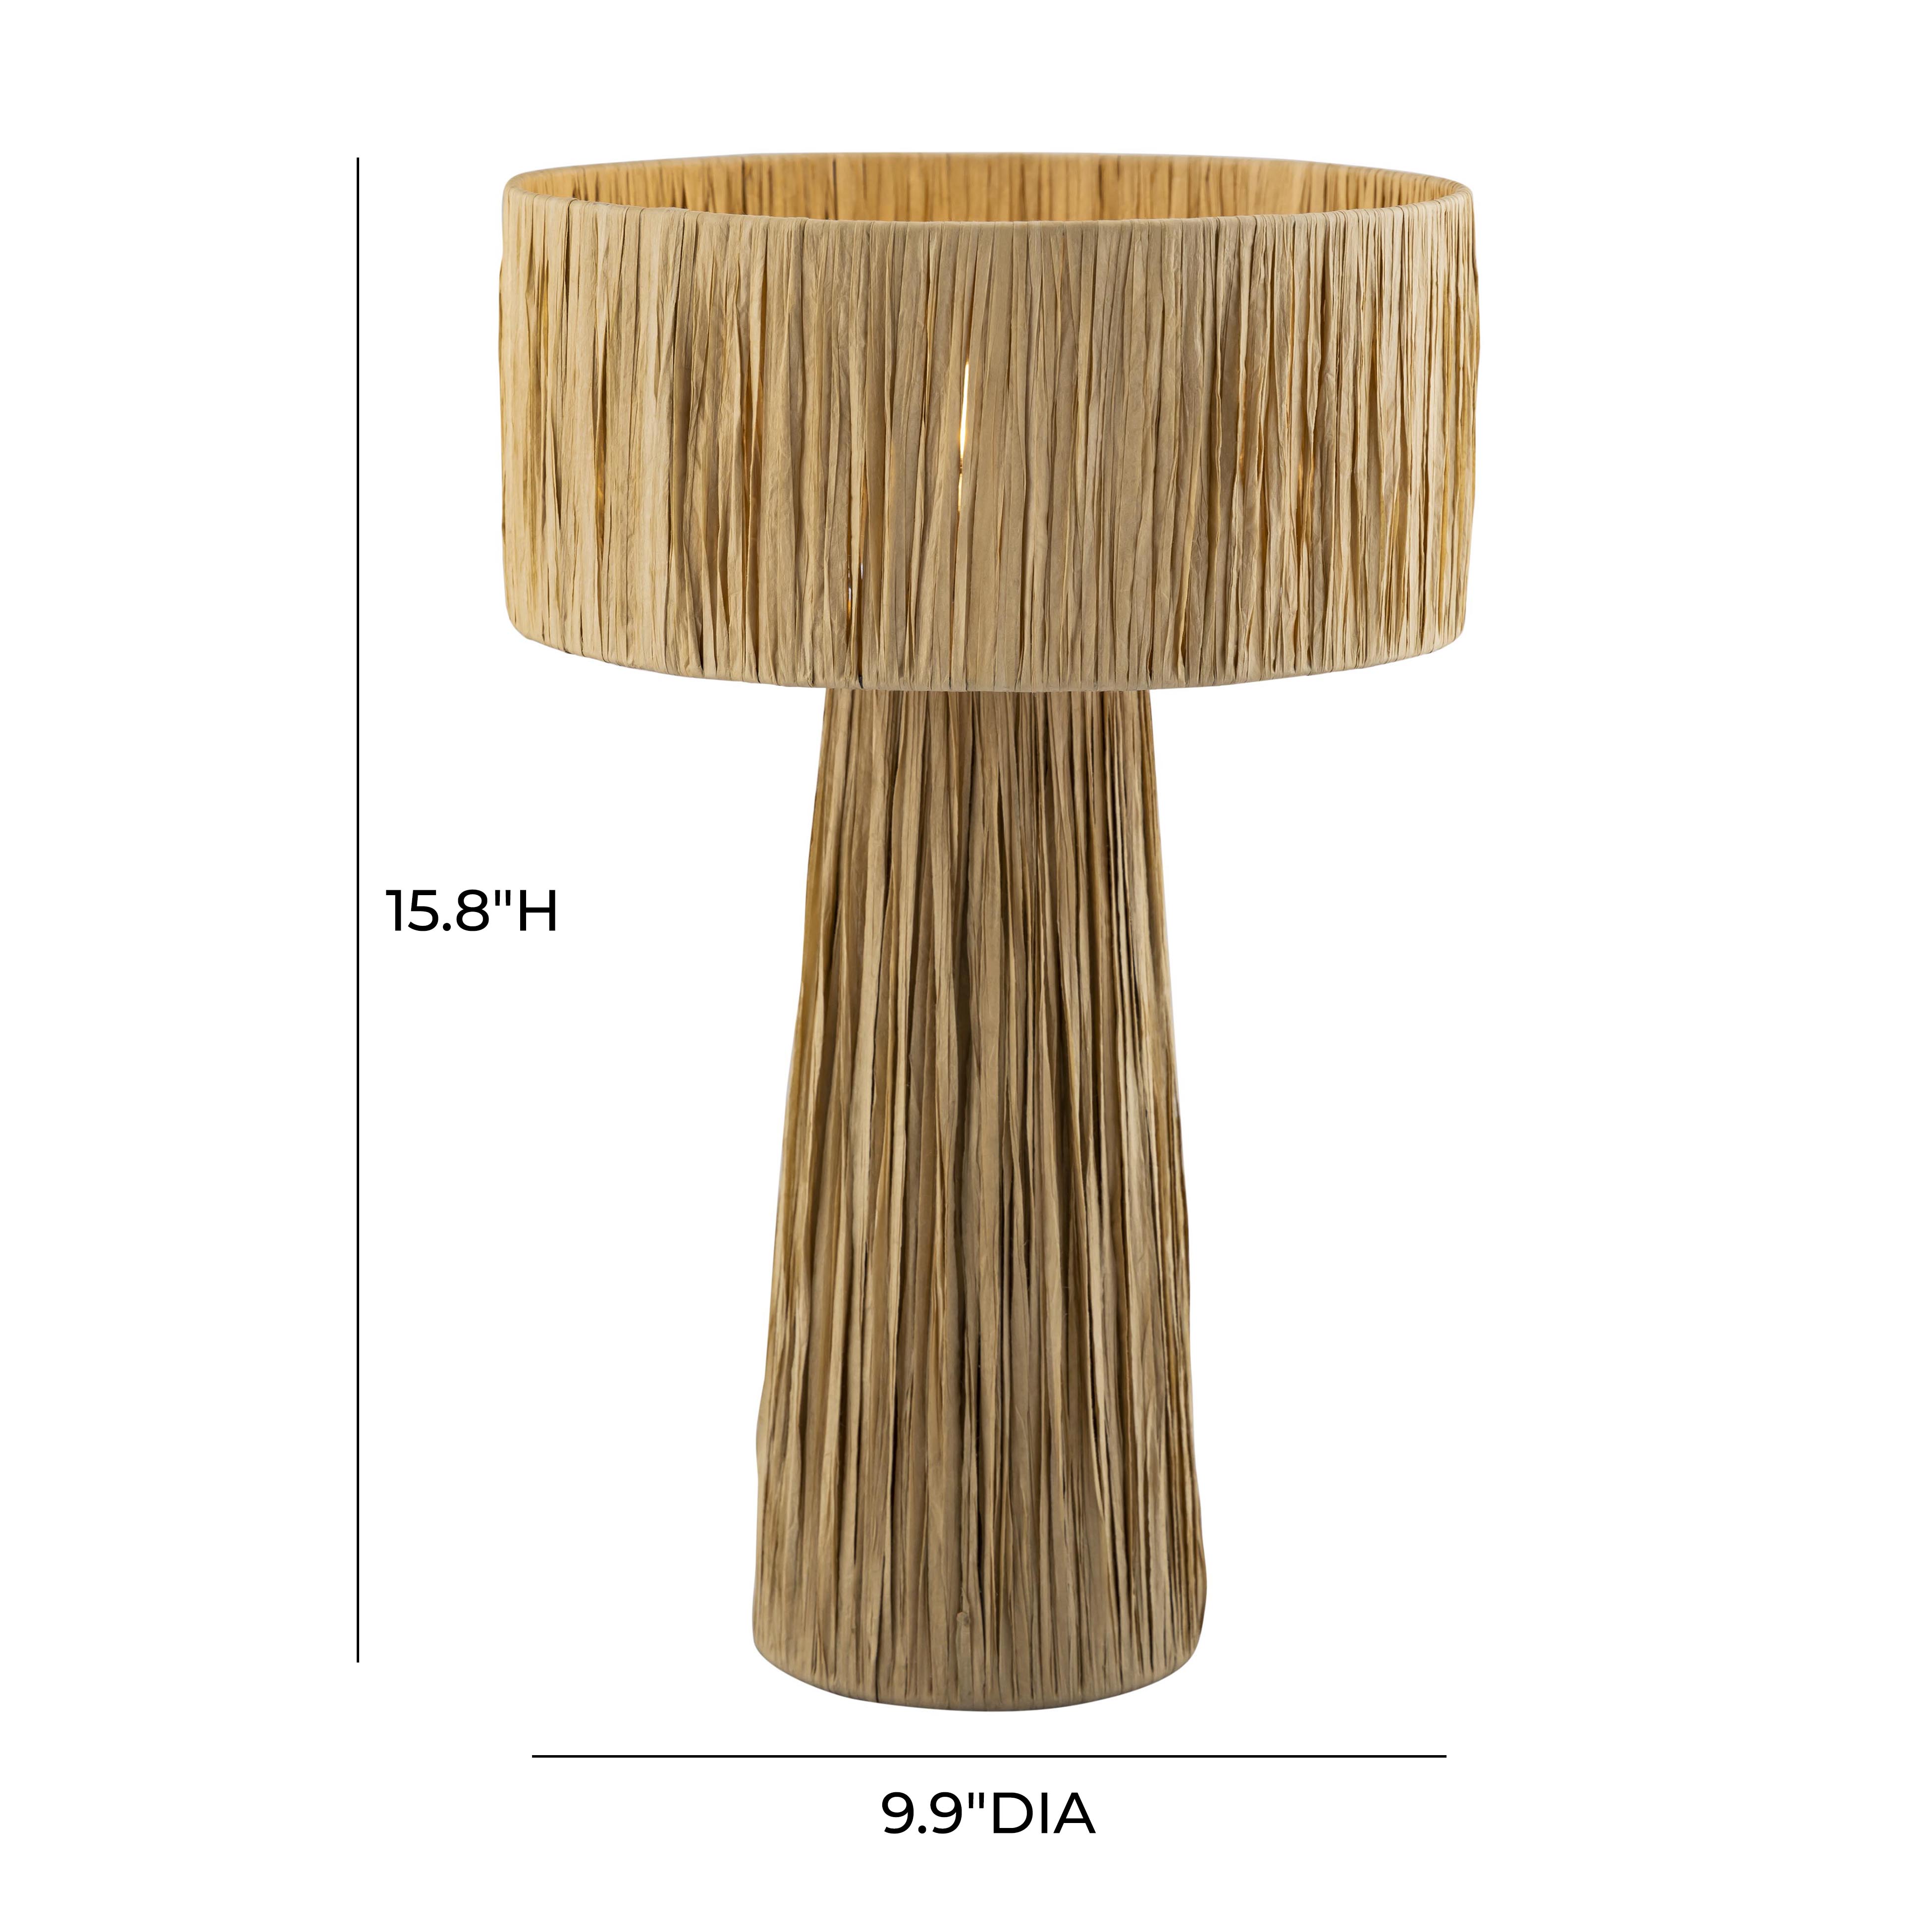 Shelby Rafia Natural Table Lamp - image 3 of 8